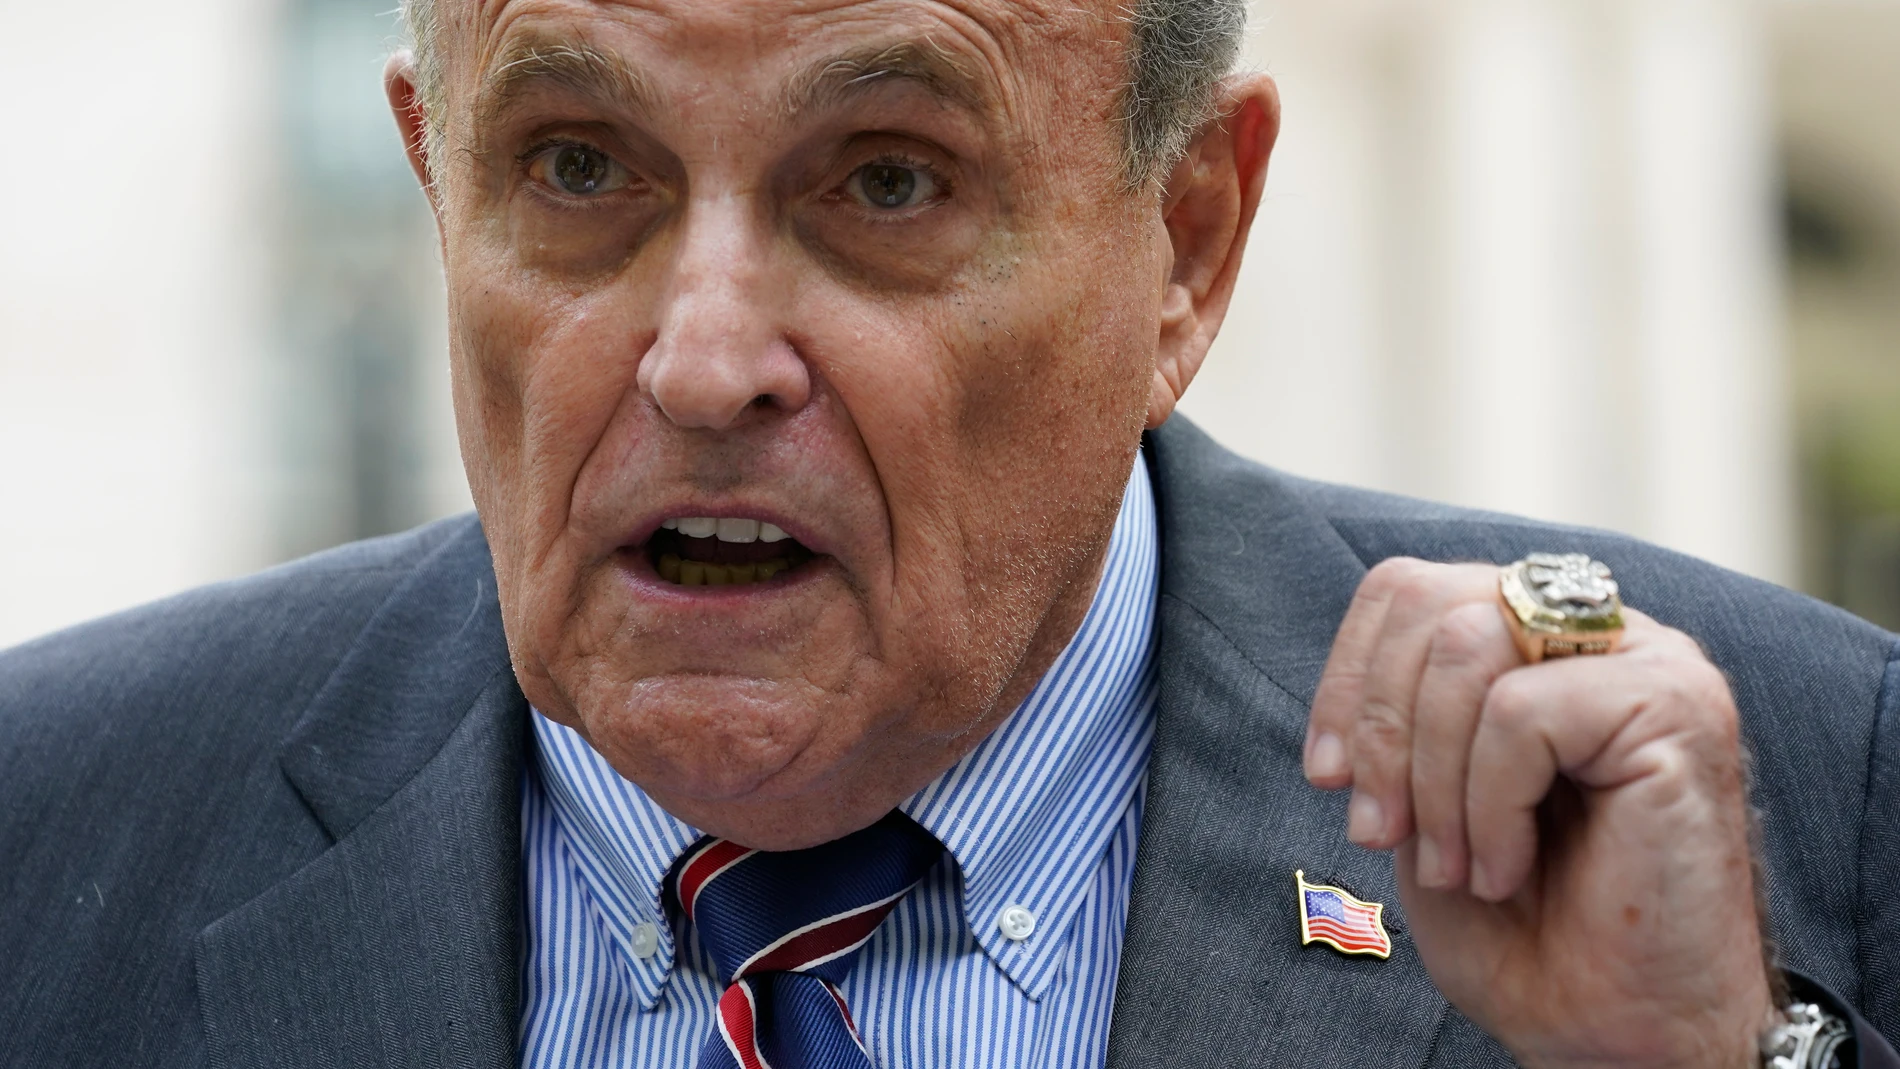 FILE - Former New York City Mayor Rudy Giuliani speaks during a news conference, Tuesday, June 7, 2022, in New York. In a legal complaint filed in New York, Monday, May 15, 2023, a woman who says she worked as an off-the-books employee for Giuliani during his stint as Donald Trump’s personal lawyer alleges that the former New York City mayor coerced her into sex and owes her nearly $2 million in unpaid wages. (AP Photo/Mary Altaffer, File)